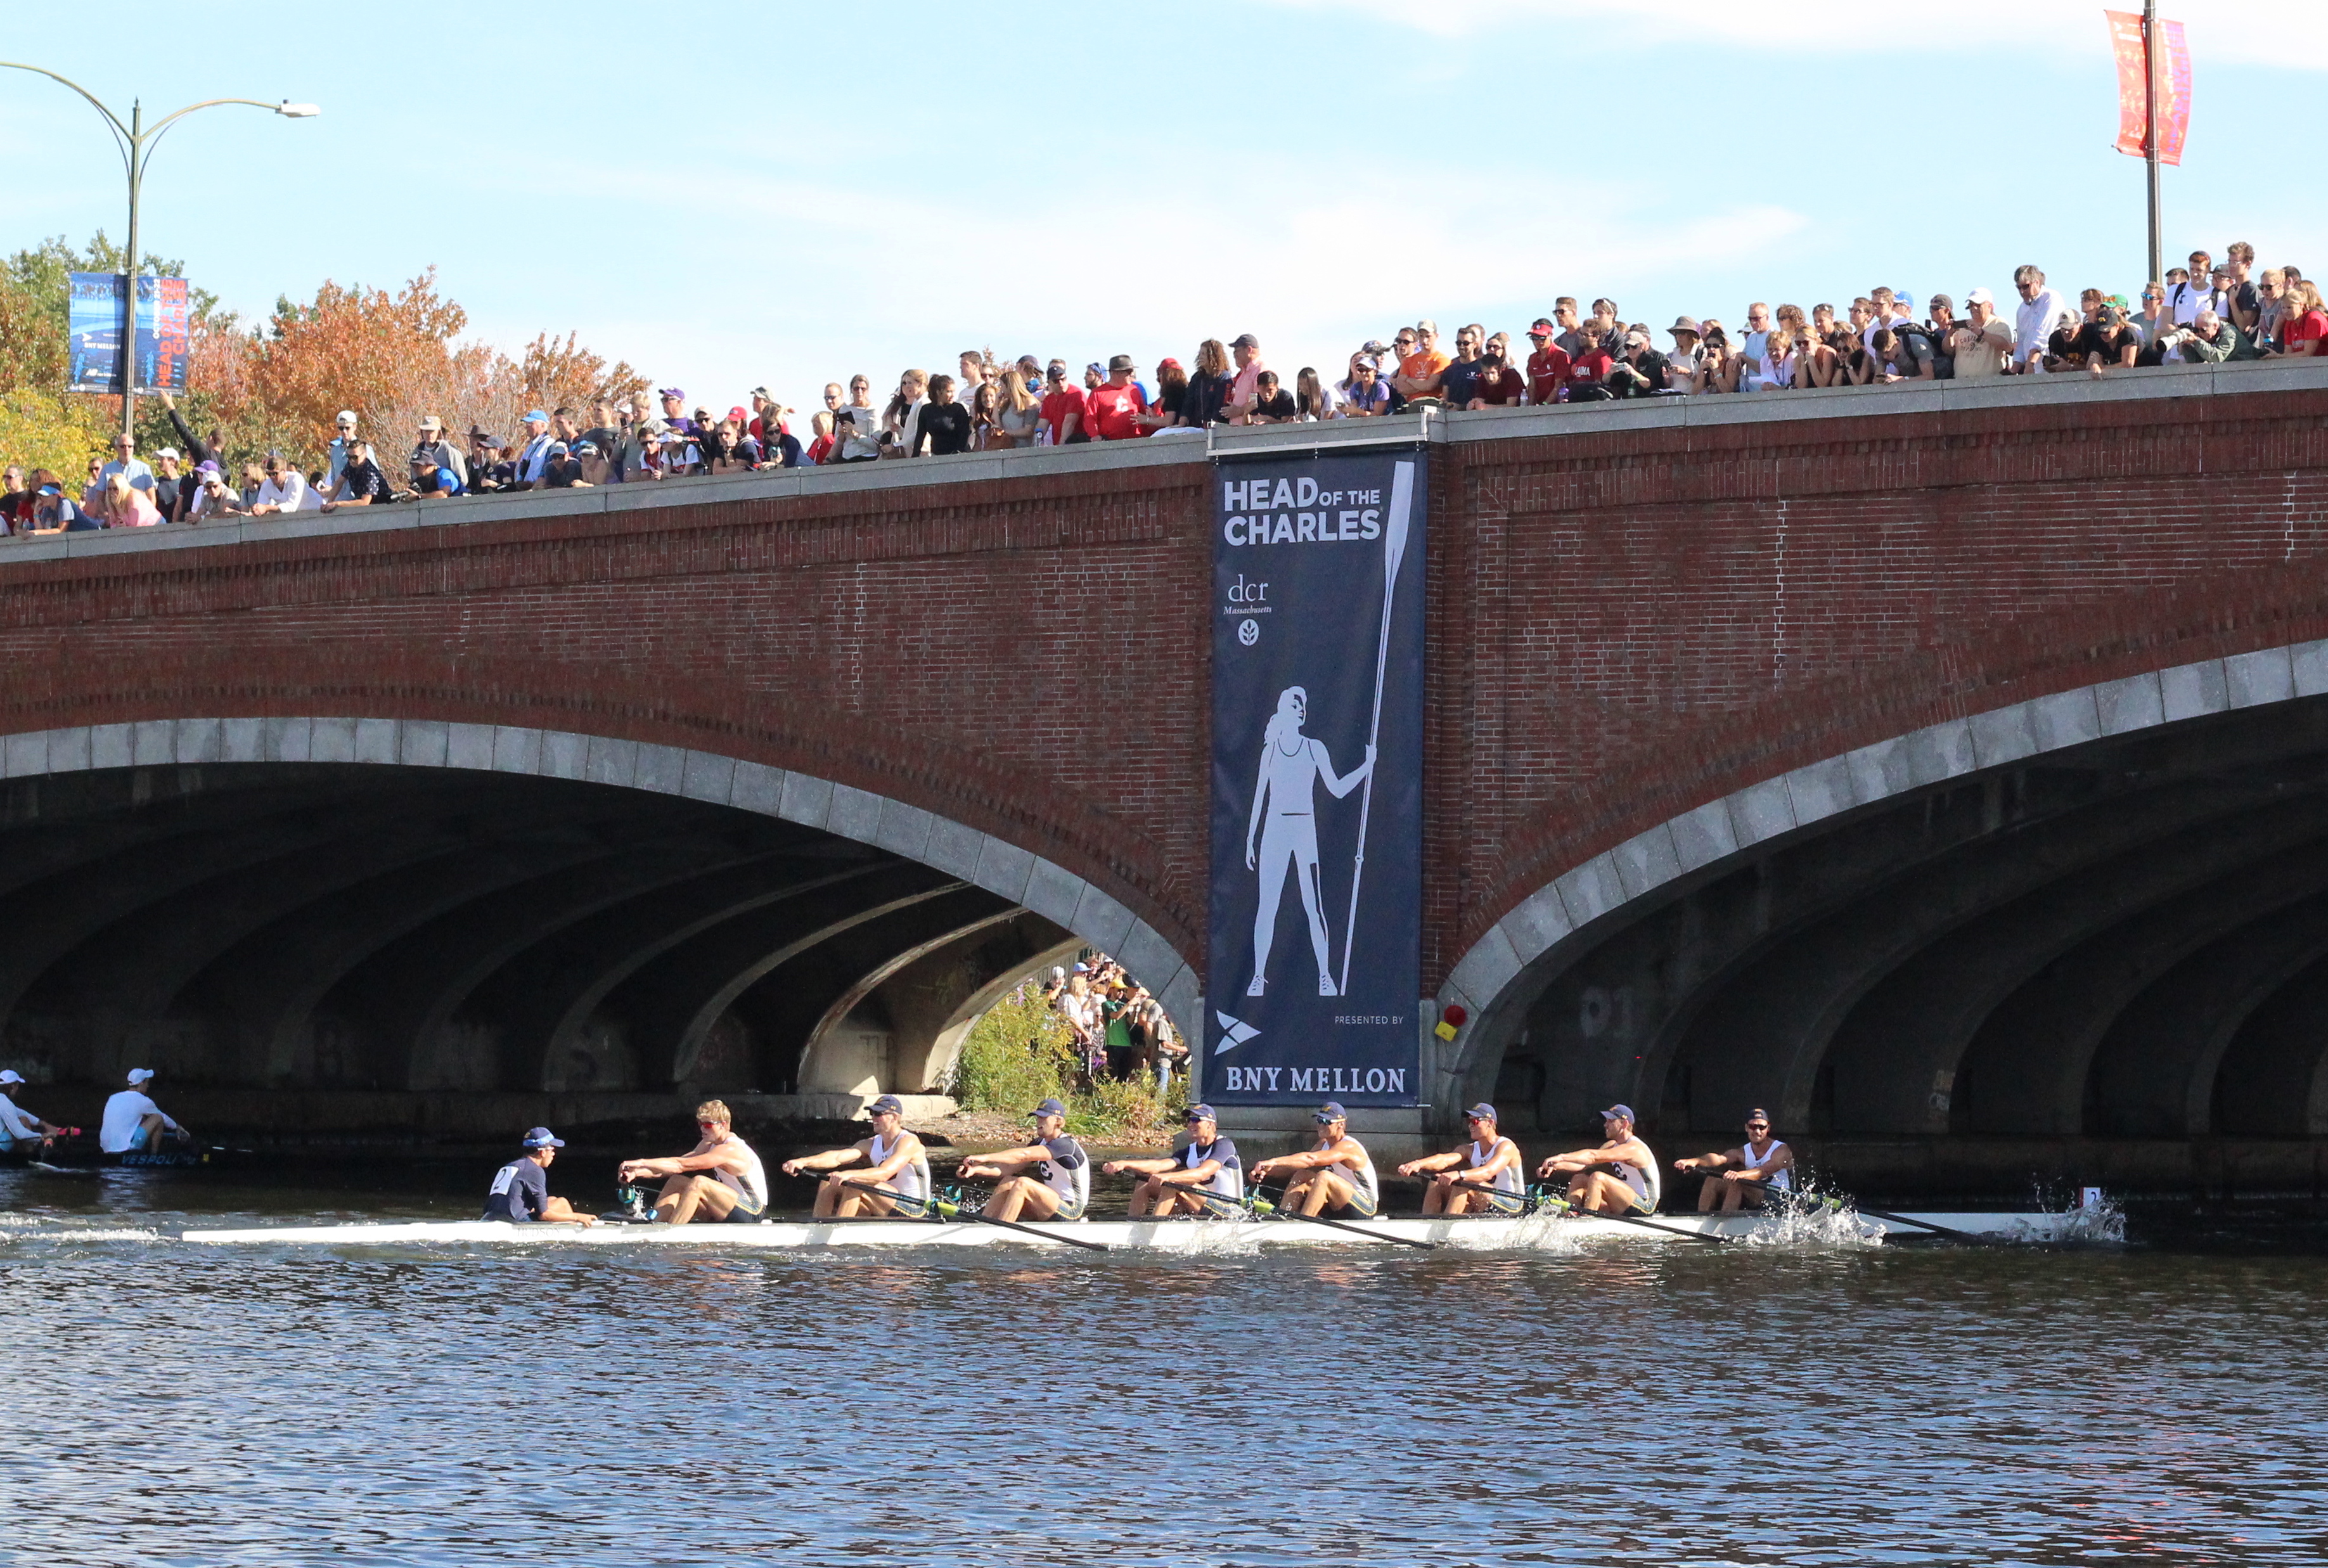 Men's Champ Eights, Cal too Much for Competition, and Course Record